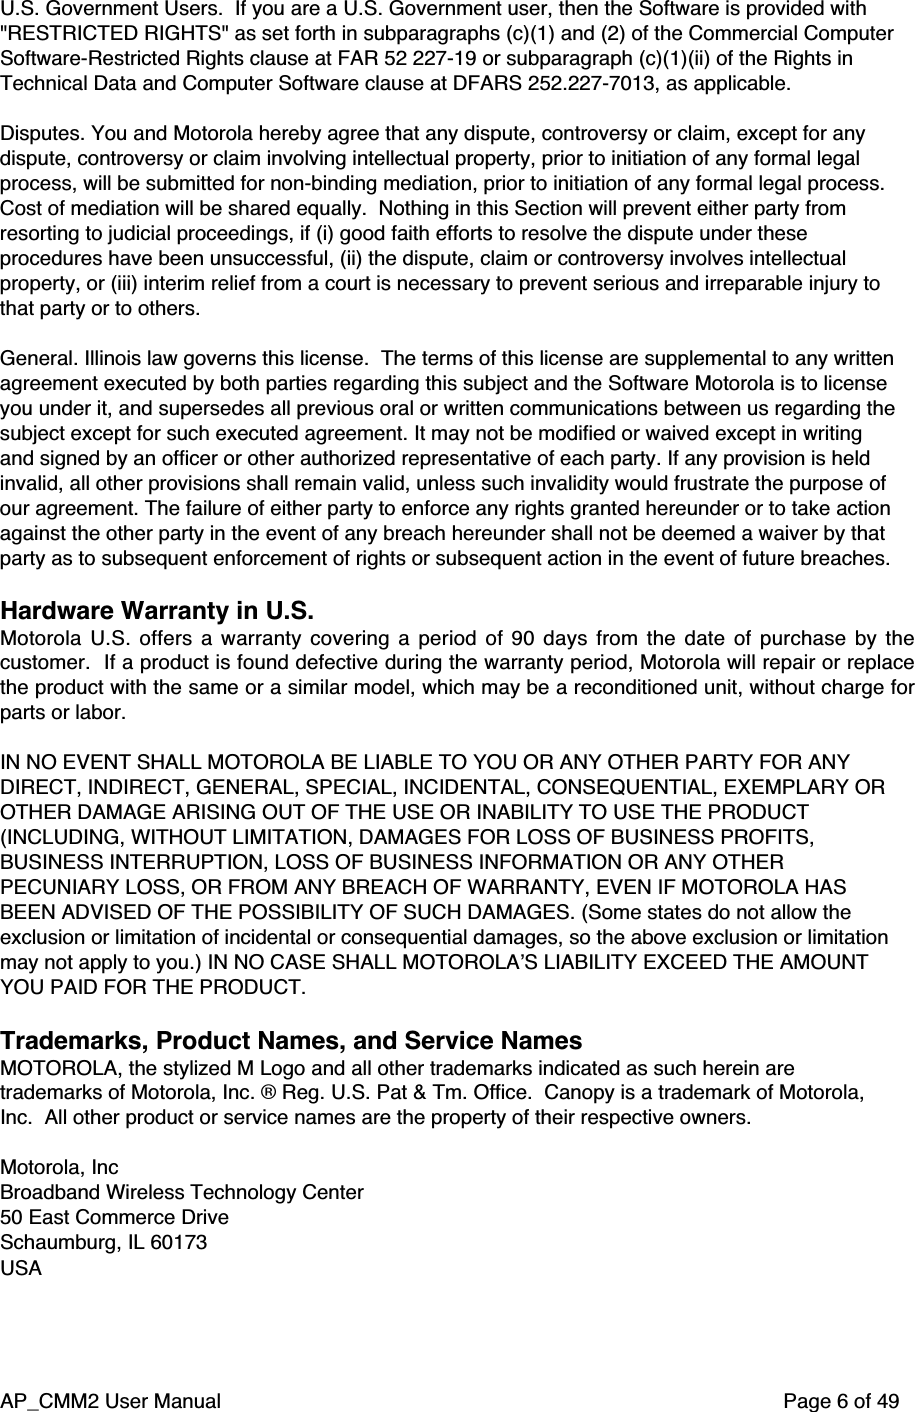 AP_CMM2 User Manual Page 6 of 49U.S. Government Users.  If you are a U.S. Government user, then the Software is provided with&quot;RESTRICTED RIGHTS&quot; as set forth in subparagraphs (c)(1) and (2) of the Commercial ComputerSoftware-Restricted Rights clause at FAR 52 227-19 or subparagraph (c)(1)(ii) of the Rights inTechnical Data and Computer Software clause at DFARS 252.227-7013, as applicable.Disputes. You and Motorola hereby agree that any dispute, controversy or claim, except for anydispute, controversy or claim involving intellectual property, prior to initiation of any formal legalprocess, will be submitted for non-binding mediation, prior to initiation of any formal legal process.Cost of mediation will be shared equally.  Nothing in this Section will prevent either party fromresorting to judicial proceedings, if (i) good faith efforts to resolve the dispute under theseprocedures have been unsuccessful, (ii) the dispute, claim or controversy involves intellectualproperty, or (iii) interim relief from a court is necessary to prevent serious and irreparable injury tothat party or to others.General. Illinois law governs this license.  The terms of this license are supplemental to any writtenagreement executed by both parties regarding this subject and the Software Motorola is to licenseyou under it, and supersedes all previous oral or written communications between us regarding thesubject except for such executed agreement. It may not be modified or waived except in writingand signed by an officer or other authorized representative of each party. If any provision is heldinvalid, all other provisions shall remain valid, unless such invalidity would frustrate the purpose ofour agreement. The failure of either party to enforce any rights granted hereunder or to take actionagainst the other party in the event of any breach hereunder shall not be deemed a waiver by thatparty as to subsequent enforcement of rights or subsequent action in the event of future breaches.Hardware Warranty in U.S.Motorola U.S. offers a warranty covering a period of 90 days from the date of purchase by thecustomer.  If a product is found defective during the warranty period, Motorola will repair or replacethe product with the same or a similar model, which may be a reconditioned unit, without charge forparts or labor.IN NO EVENT SHALL MOTOROLA BE LIABLE TO YOU OR ANY OTHER PARTY FOR ANYDIRECT, INDIRECT, GENERAL, SPECIAL, INCIDENTAL, CONSEQUENTIAL, EXEMPLARY OROTHER DAMAGE ARISING OUT OF THE USE OR INABILITY TO USE THE PRODUCT(INCLUDING, WITHOUT LIMITATION, DAMAGES FOR LOSS OF BUSINESS PROFITS,BUSINESS INTERRUPTION, LOSS OF BUSINESS INFORMATION OR ANY OTHERPECUNIARY LOSS, OR FROM ANY BREACH OF WARRANTY, EVEN IF MOTOROLA HASBEEN ADVISED OF THE POSSIBILITY OF SUCH DAMAGES. (Some states do not allow theexclusion or limitation of incidental or consequential damages, so the above exclusion or limitationmay not apply to you.) IN NO CASE SHALL MOTOROLA’S LIABILITY EXCEED THE AMOUNTYOU PAID FOR THE PRODUCT.Trademarks, Product Names, and Service NamesMOTOROLA, the stylized M Logo and all other trademarks indicated as such herein aretrademarks of Motorola, Inc. ® Reg. U.S. Pat &amp; Tm. Office.  Canopy is a trademark of Motorola,Inc.  All other product or service names are the property of their respective owners.Motorola, IncBroadband Wireless Technology Center50 East Commerce DriveSchaumburg, IL 60173USA